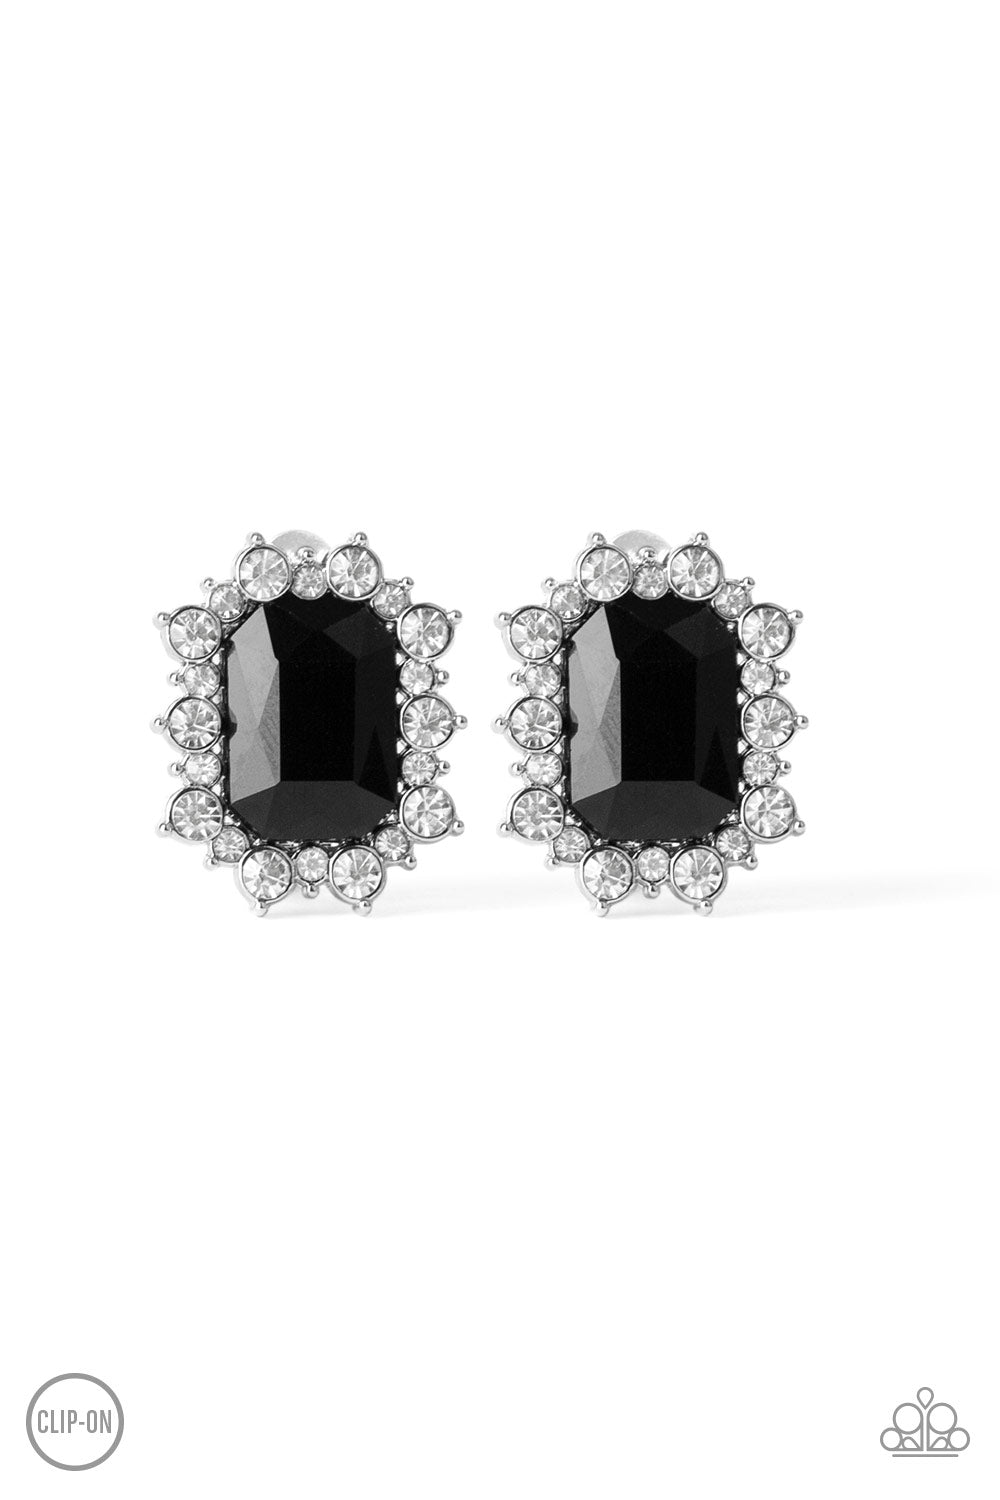 Prime Time Shimmer - Black Item #E381 A border of glassy white rhinestones spin around a regal emerald-cut black rhinestone center for a refined look. Earring attaches to a standard clip-on fitting. All Paparazzi Accessories are lead free and nickel free!  Sold as one pair of clip-on earrings.